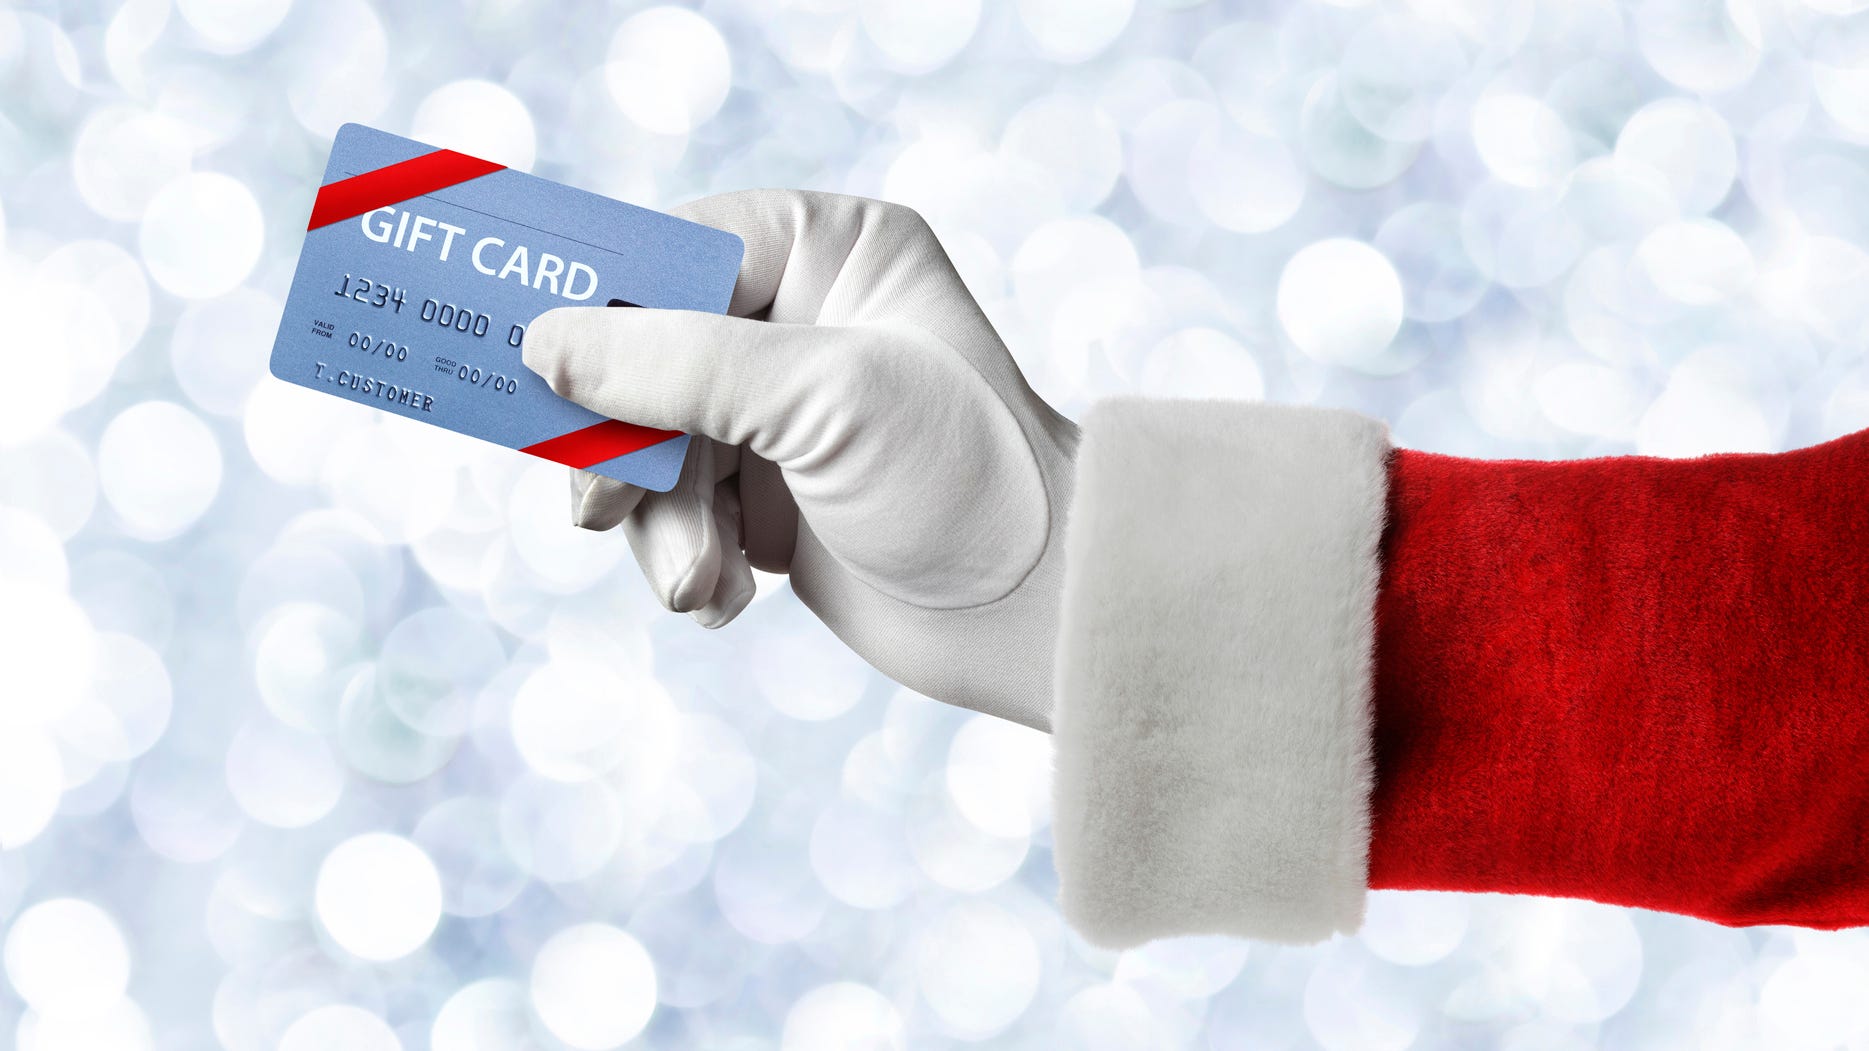 Gift Card Promotions Where To Get Bonuses And Freebies